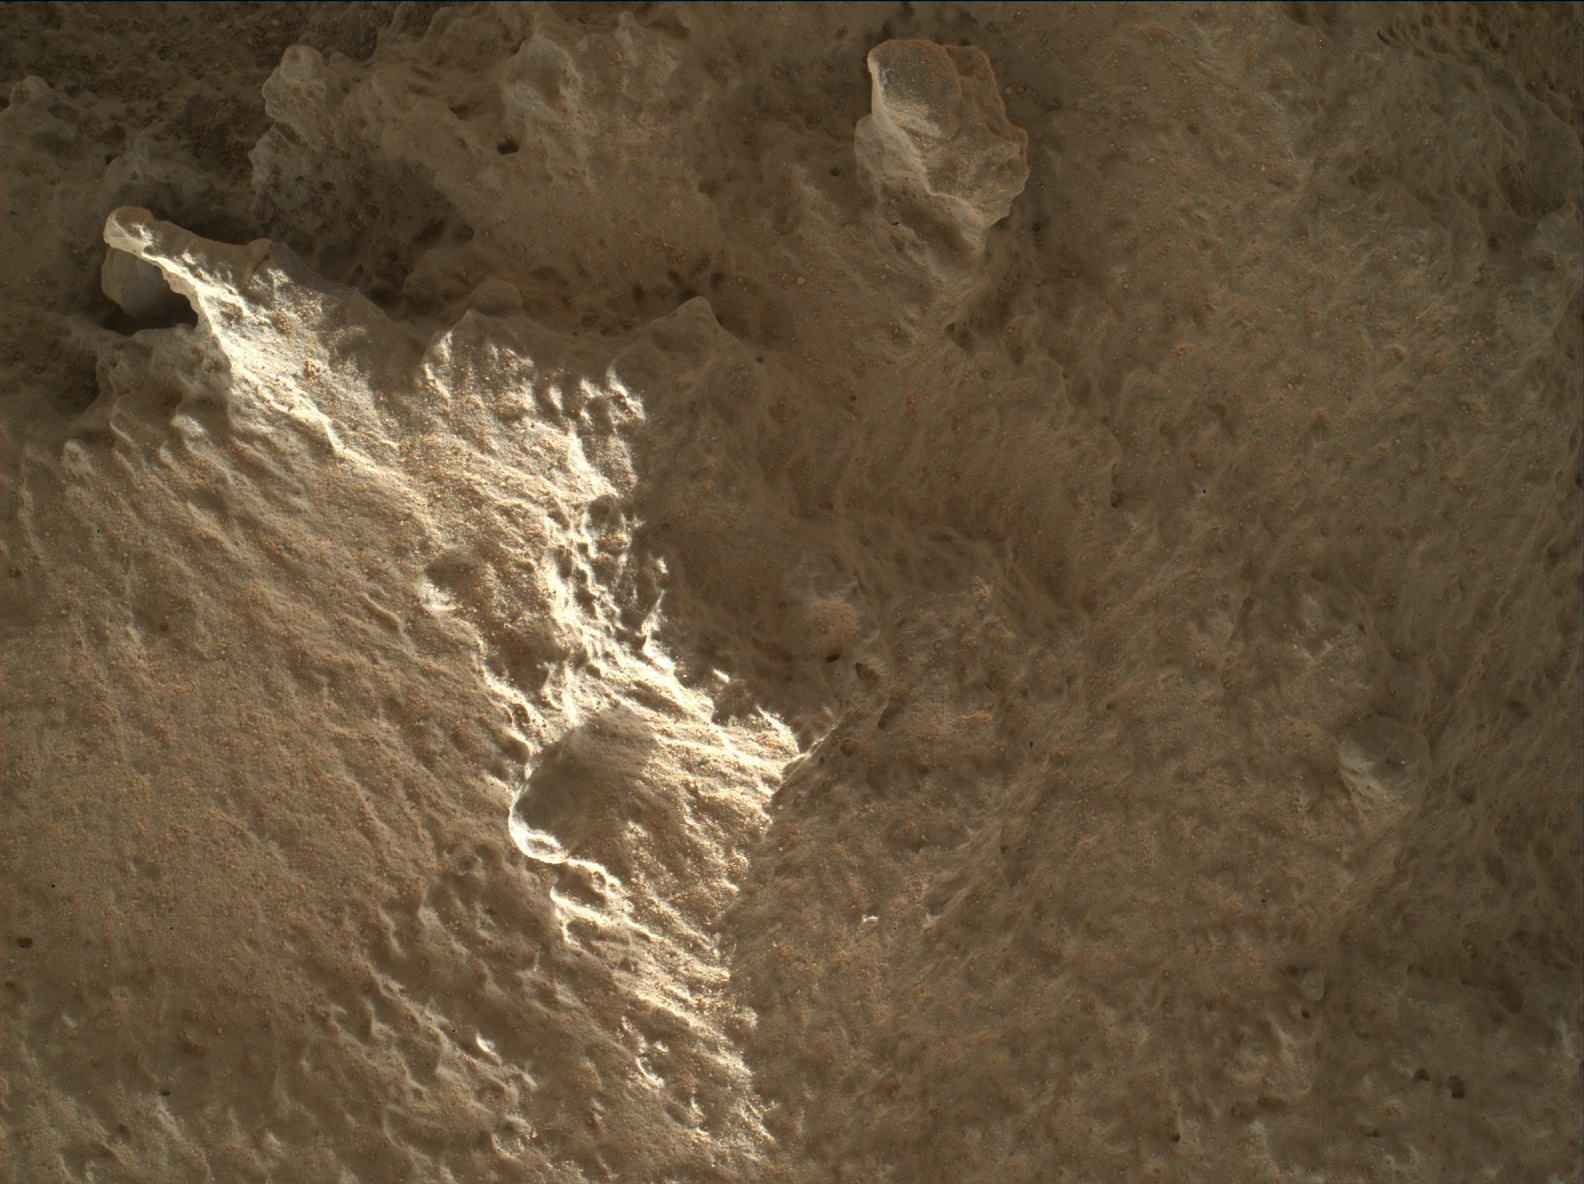 Nasa's Mars rover Curiosity acquired this image using its Mars Hand Lens Imager (MAHLI) on Sol 1261